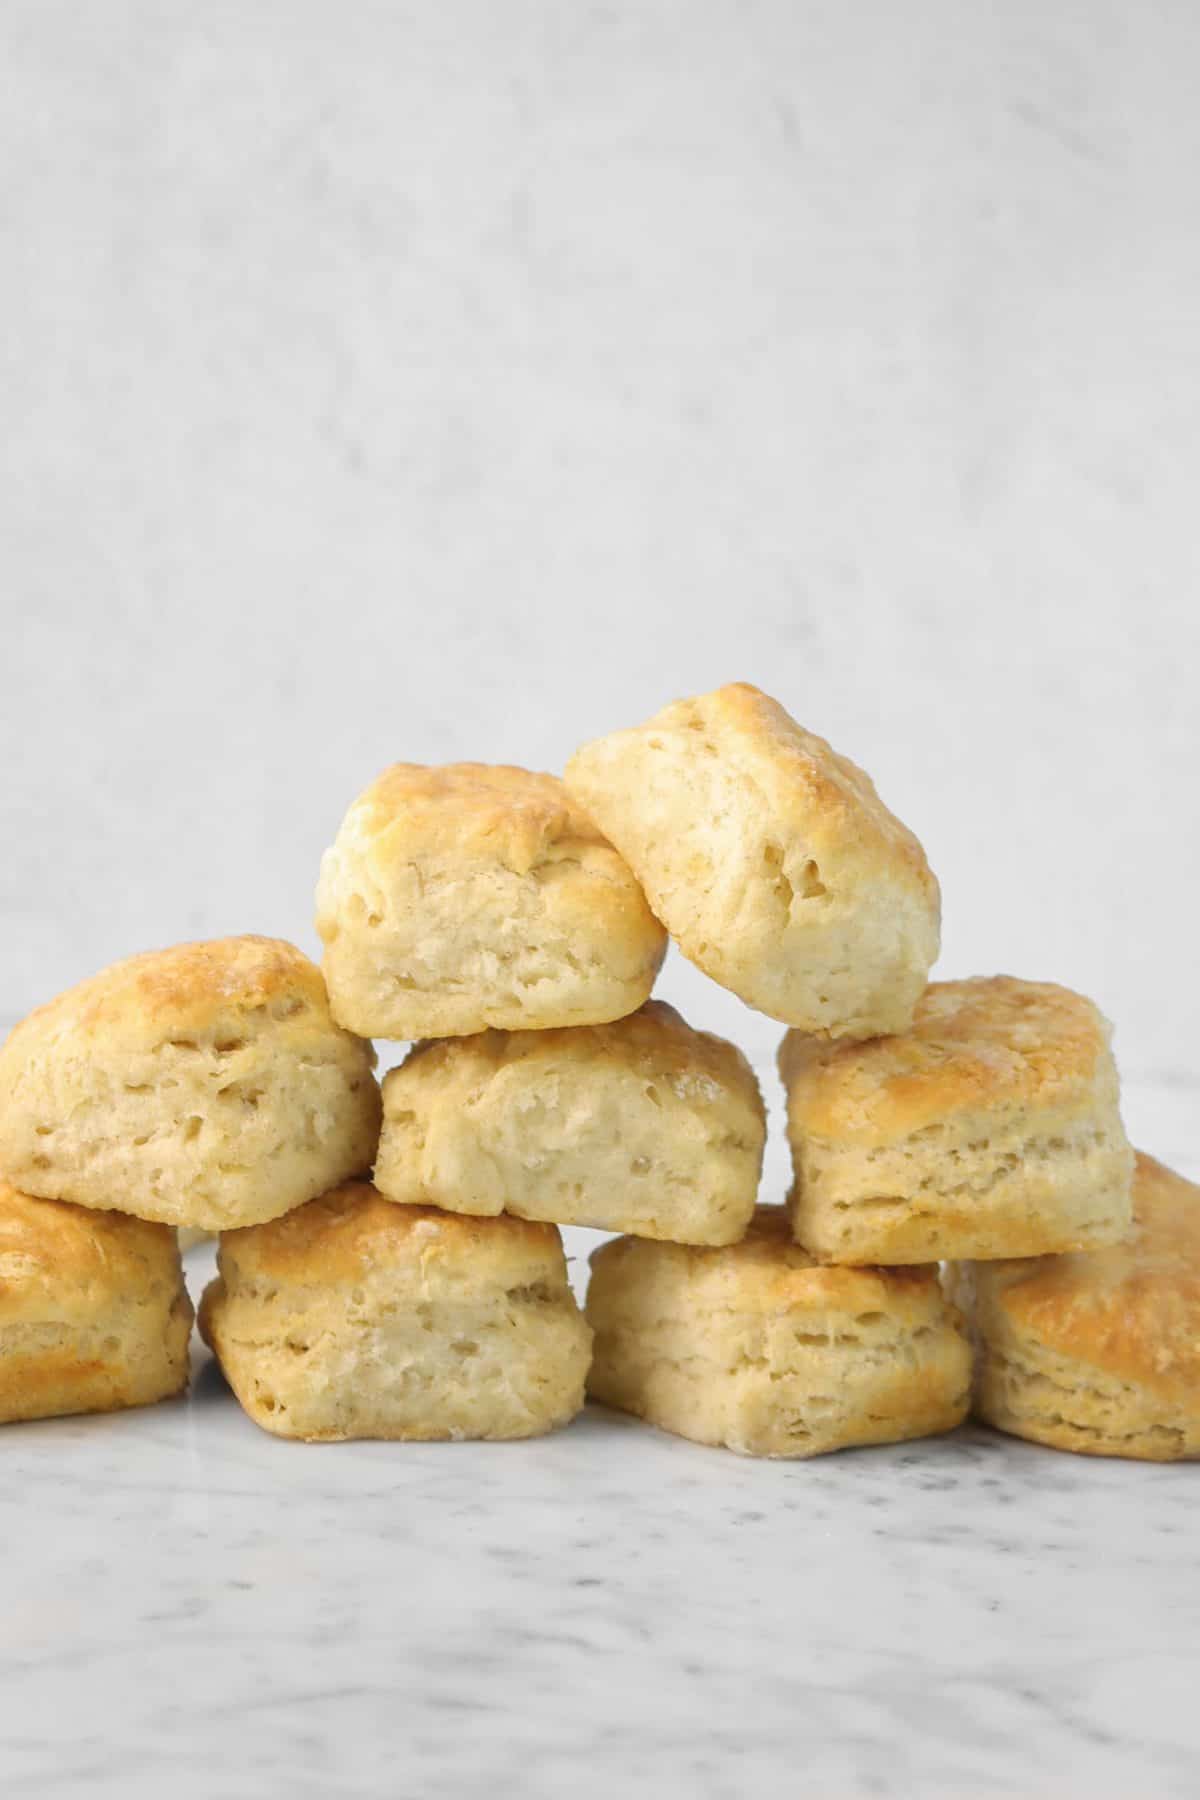 biscuits stacked on top of each other